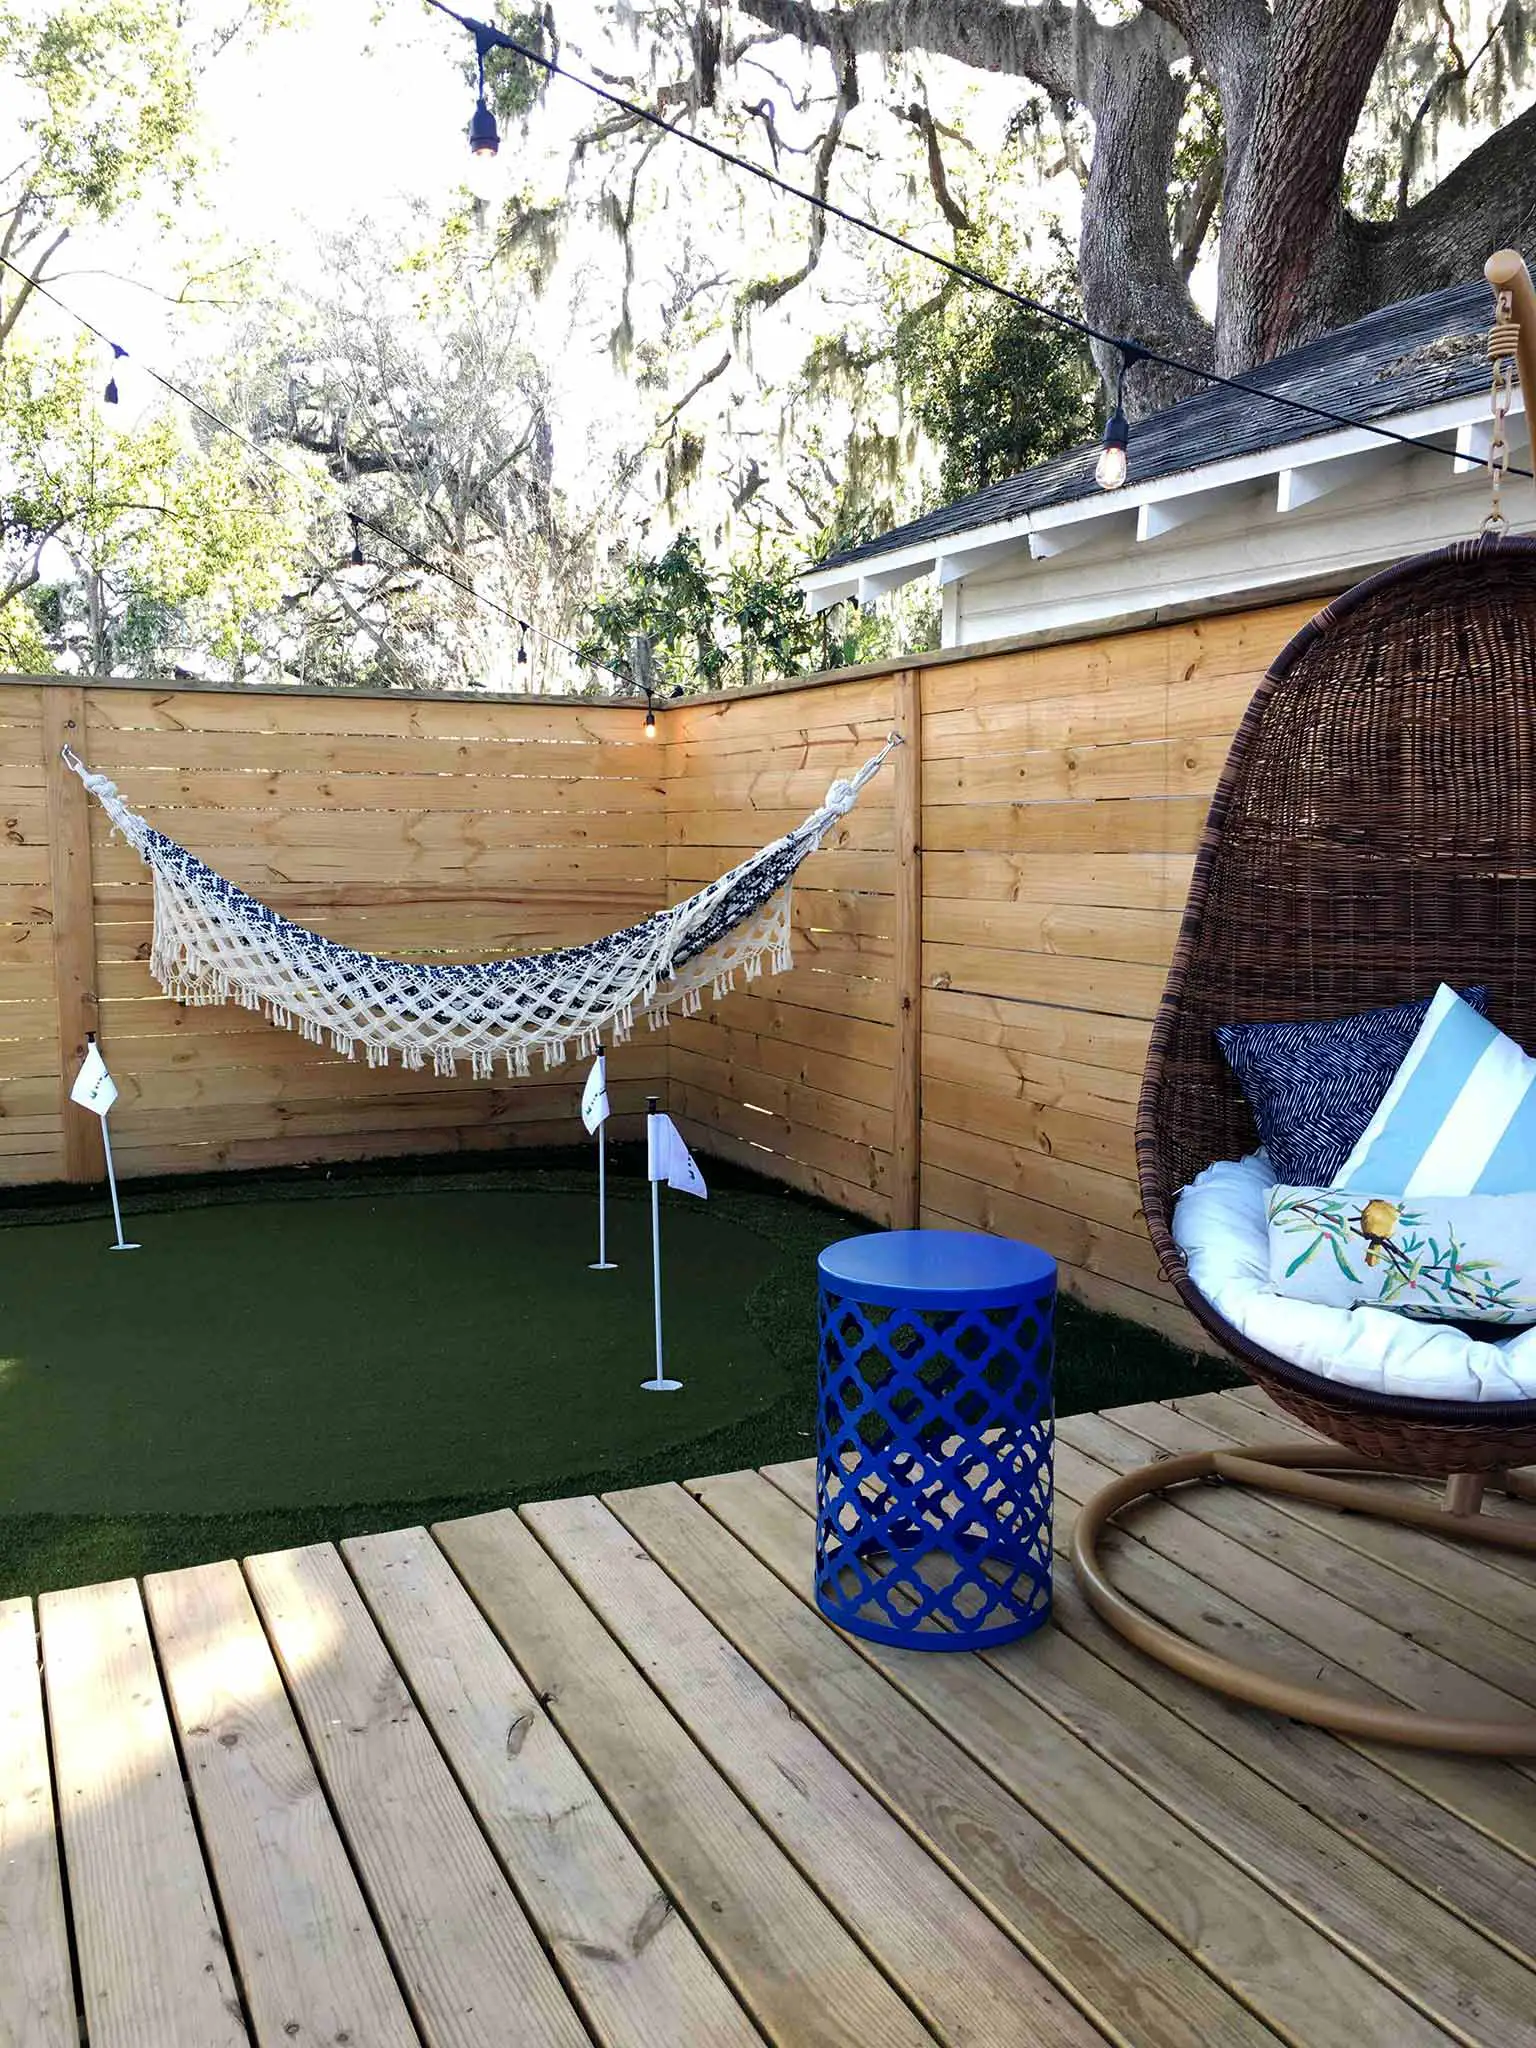 Hammock and putting green - How we planned our backyard space - That Homebird Life Blog